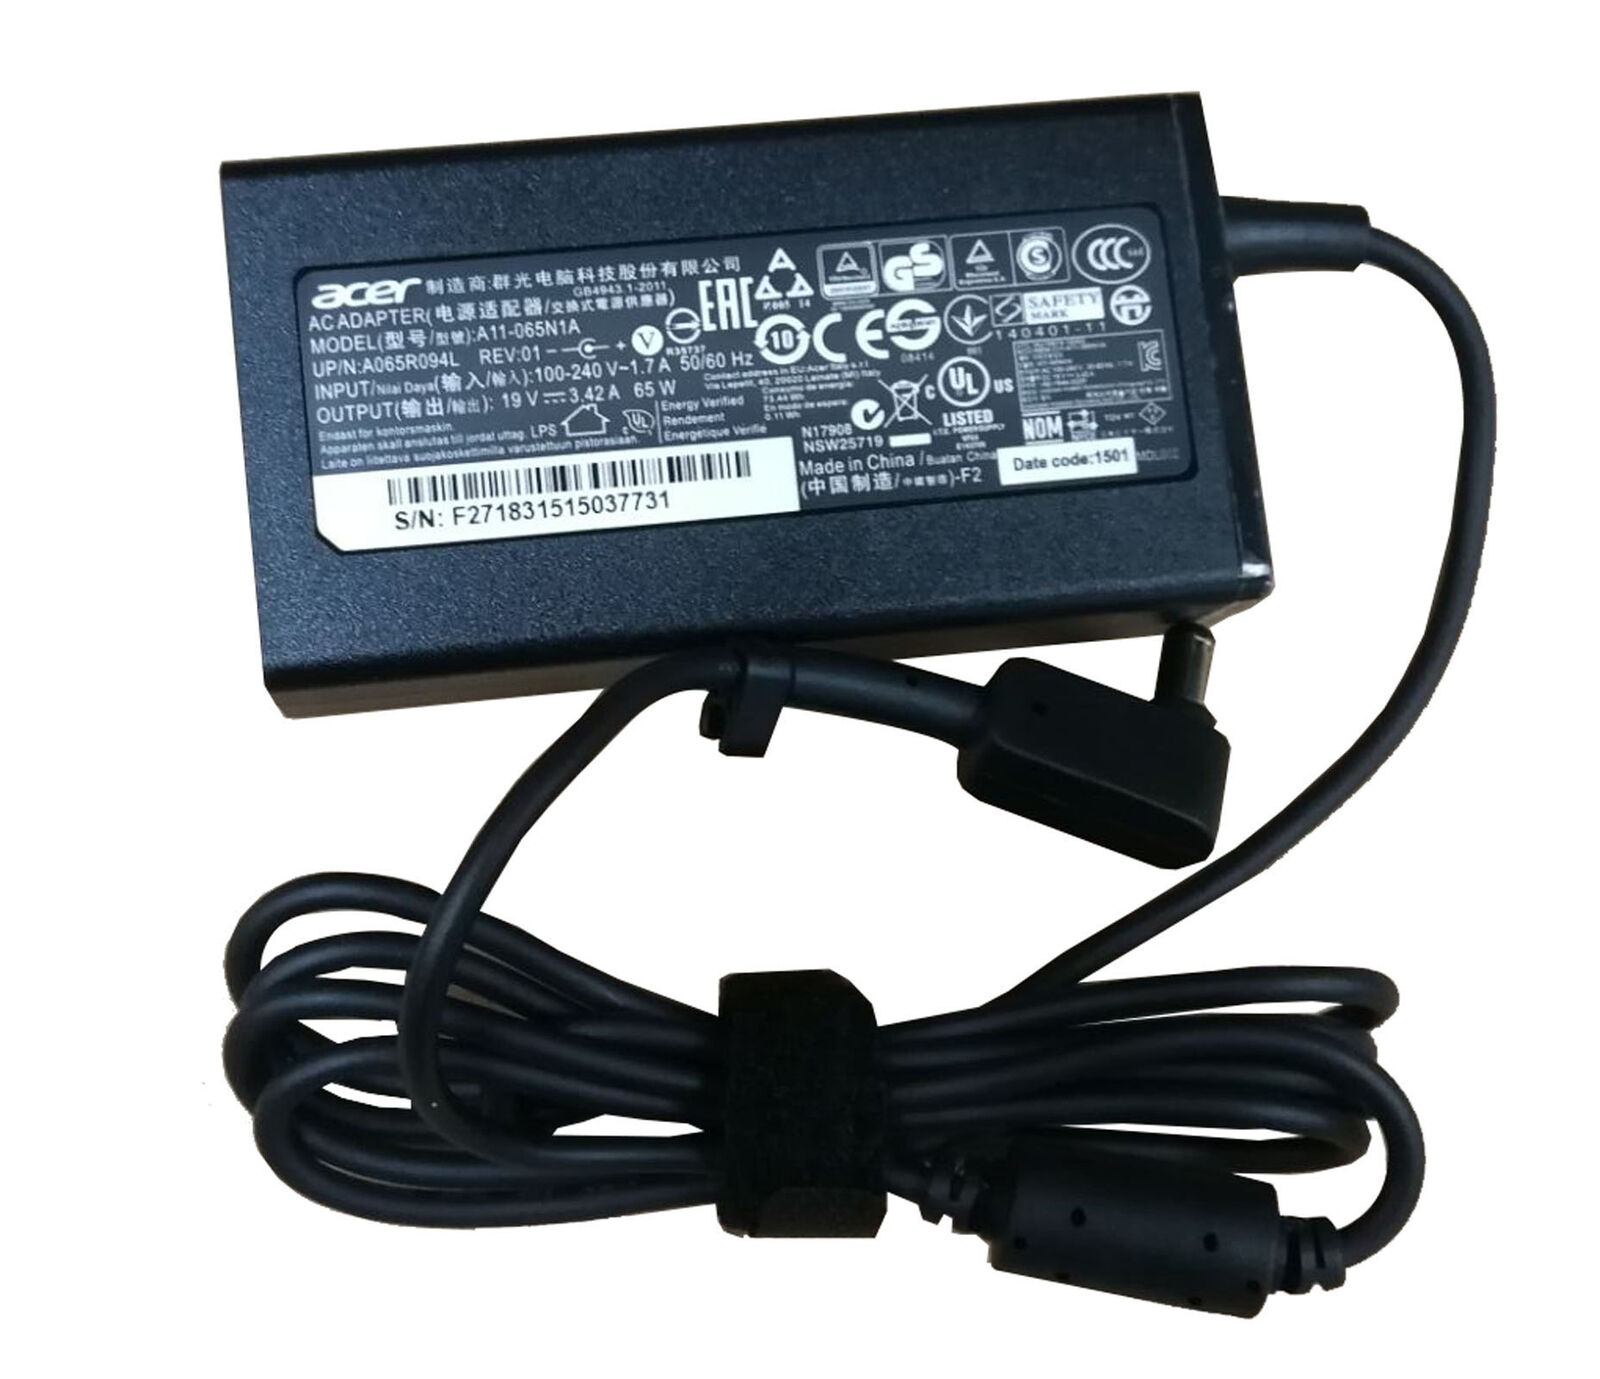 65W Acer Aspire S7-392 Charger AC Adapter Power Cord